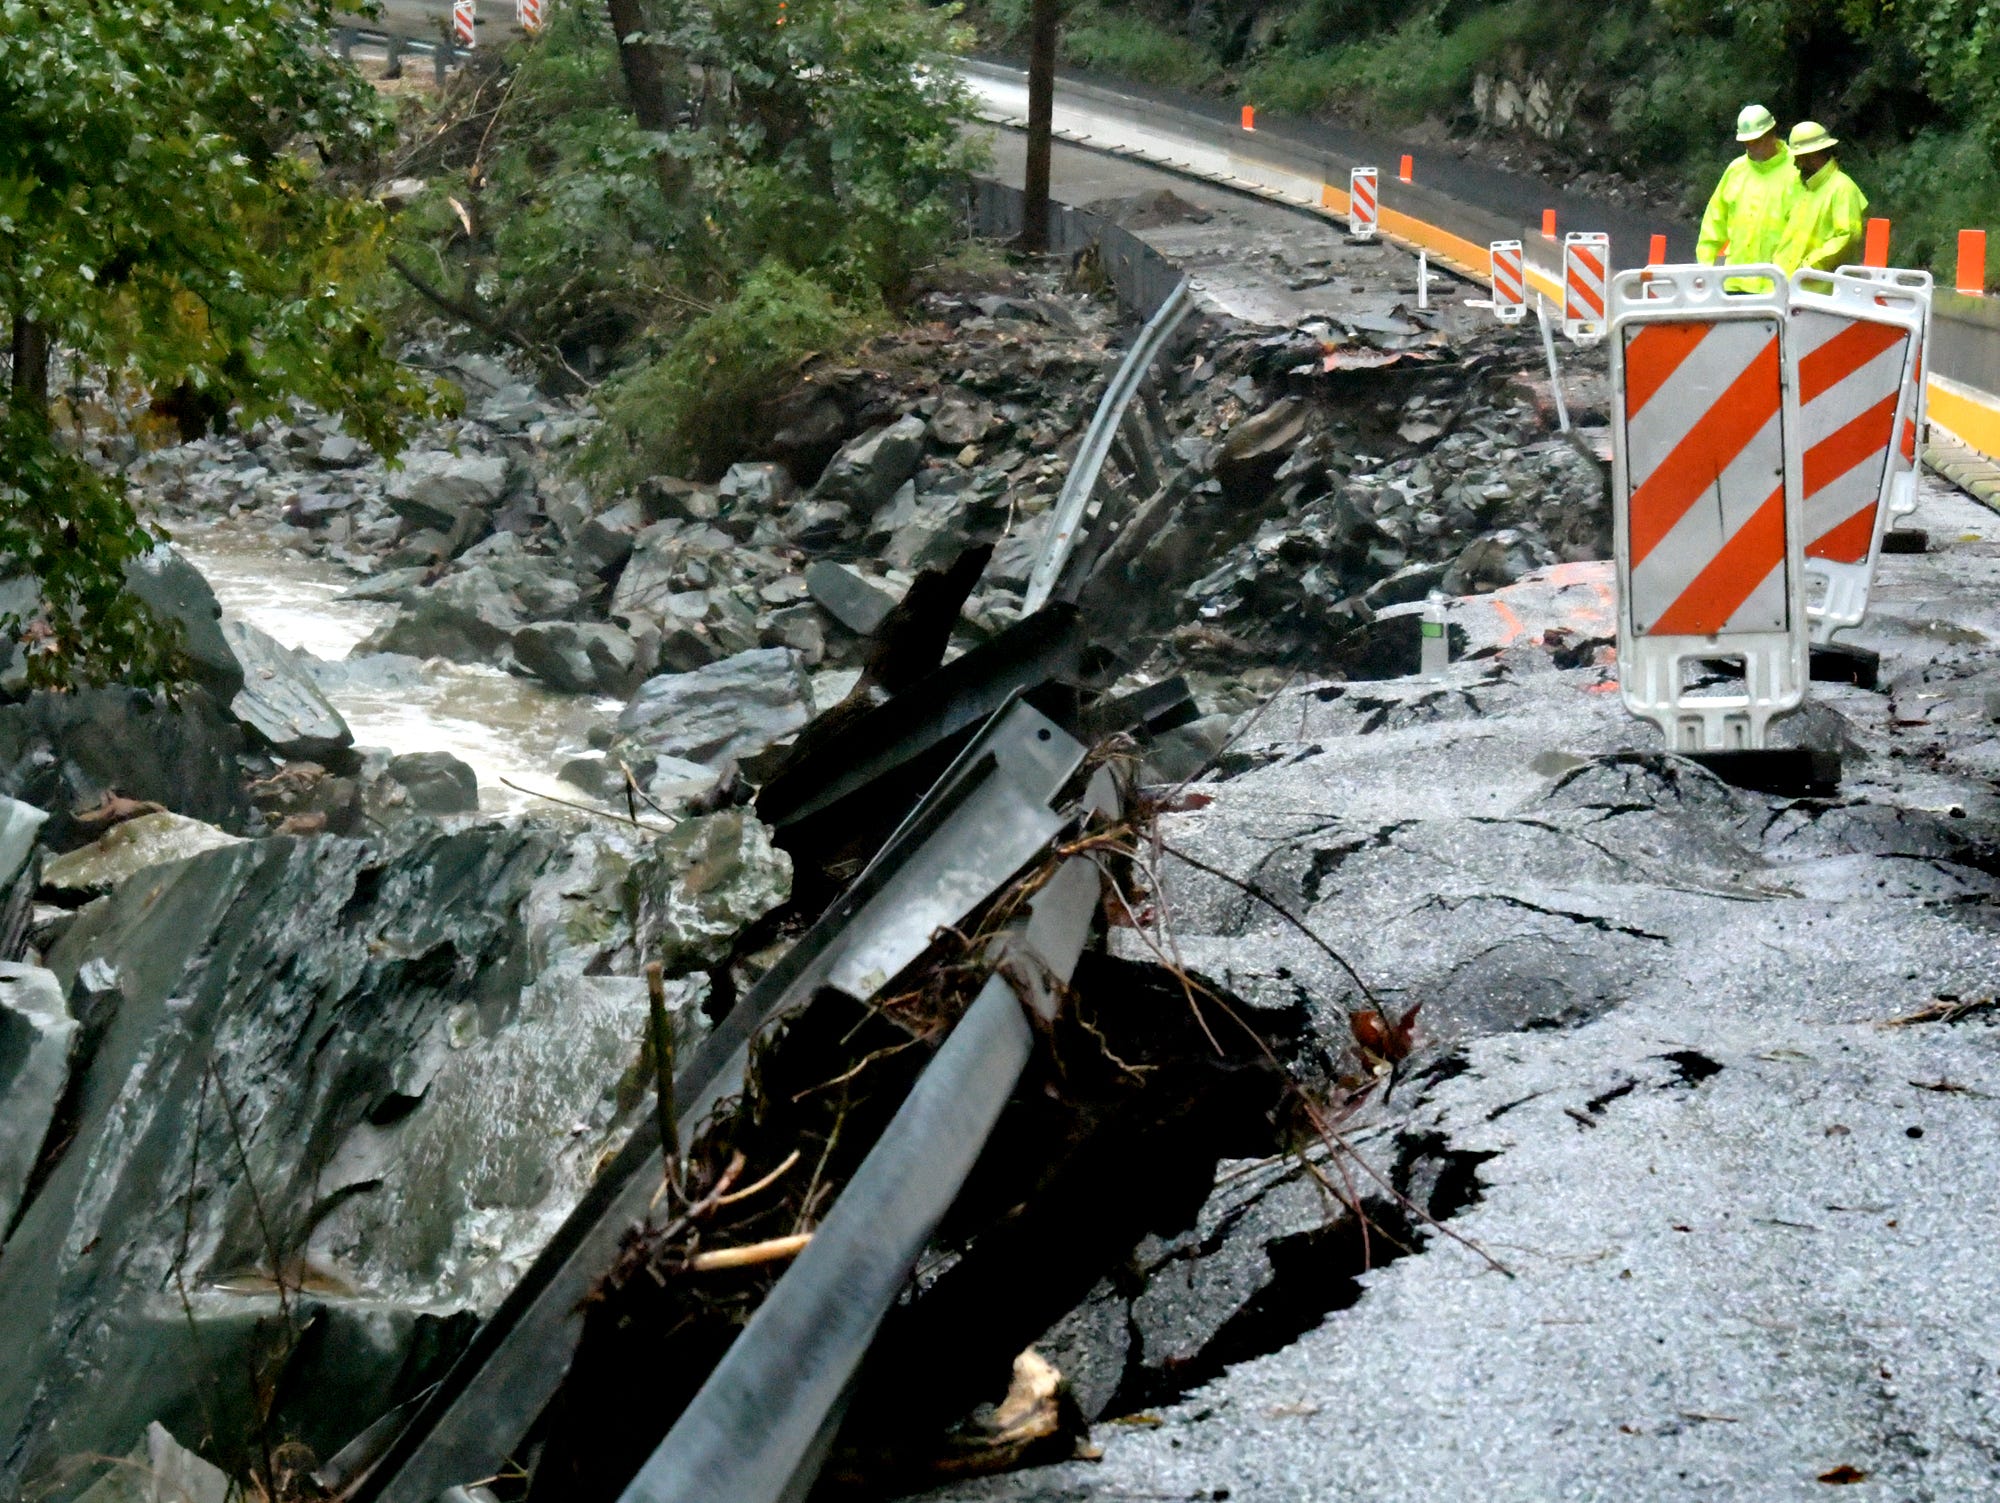 Accomac Road flood damage Monday, Sept. 10, 2018, closed it to one lane of local and emergency travel only. Bill Kalina photo